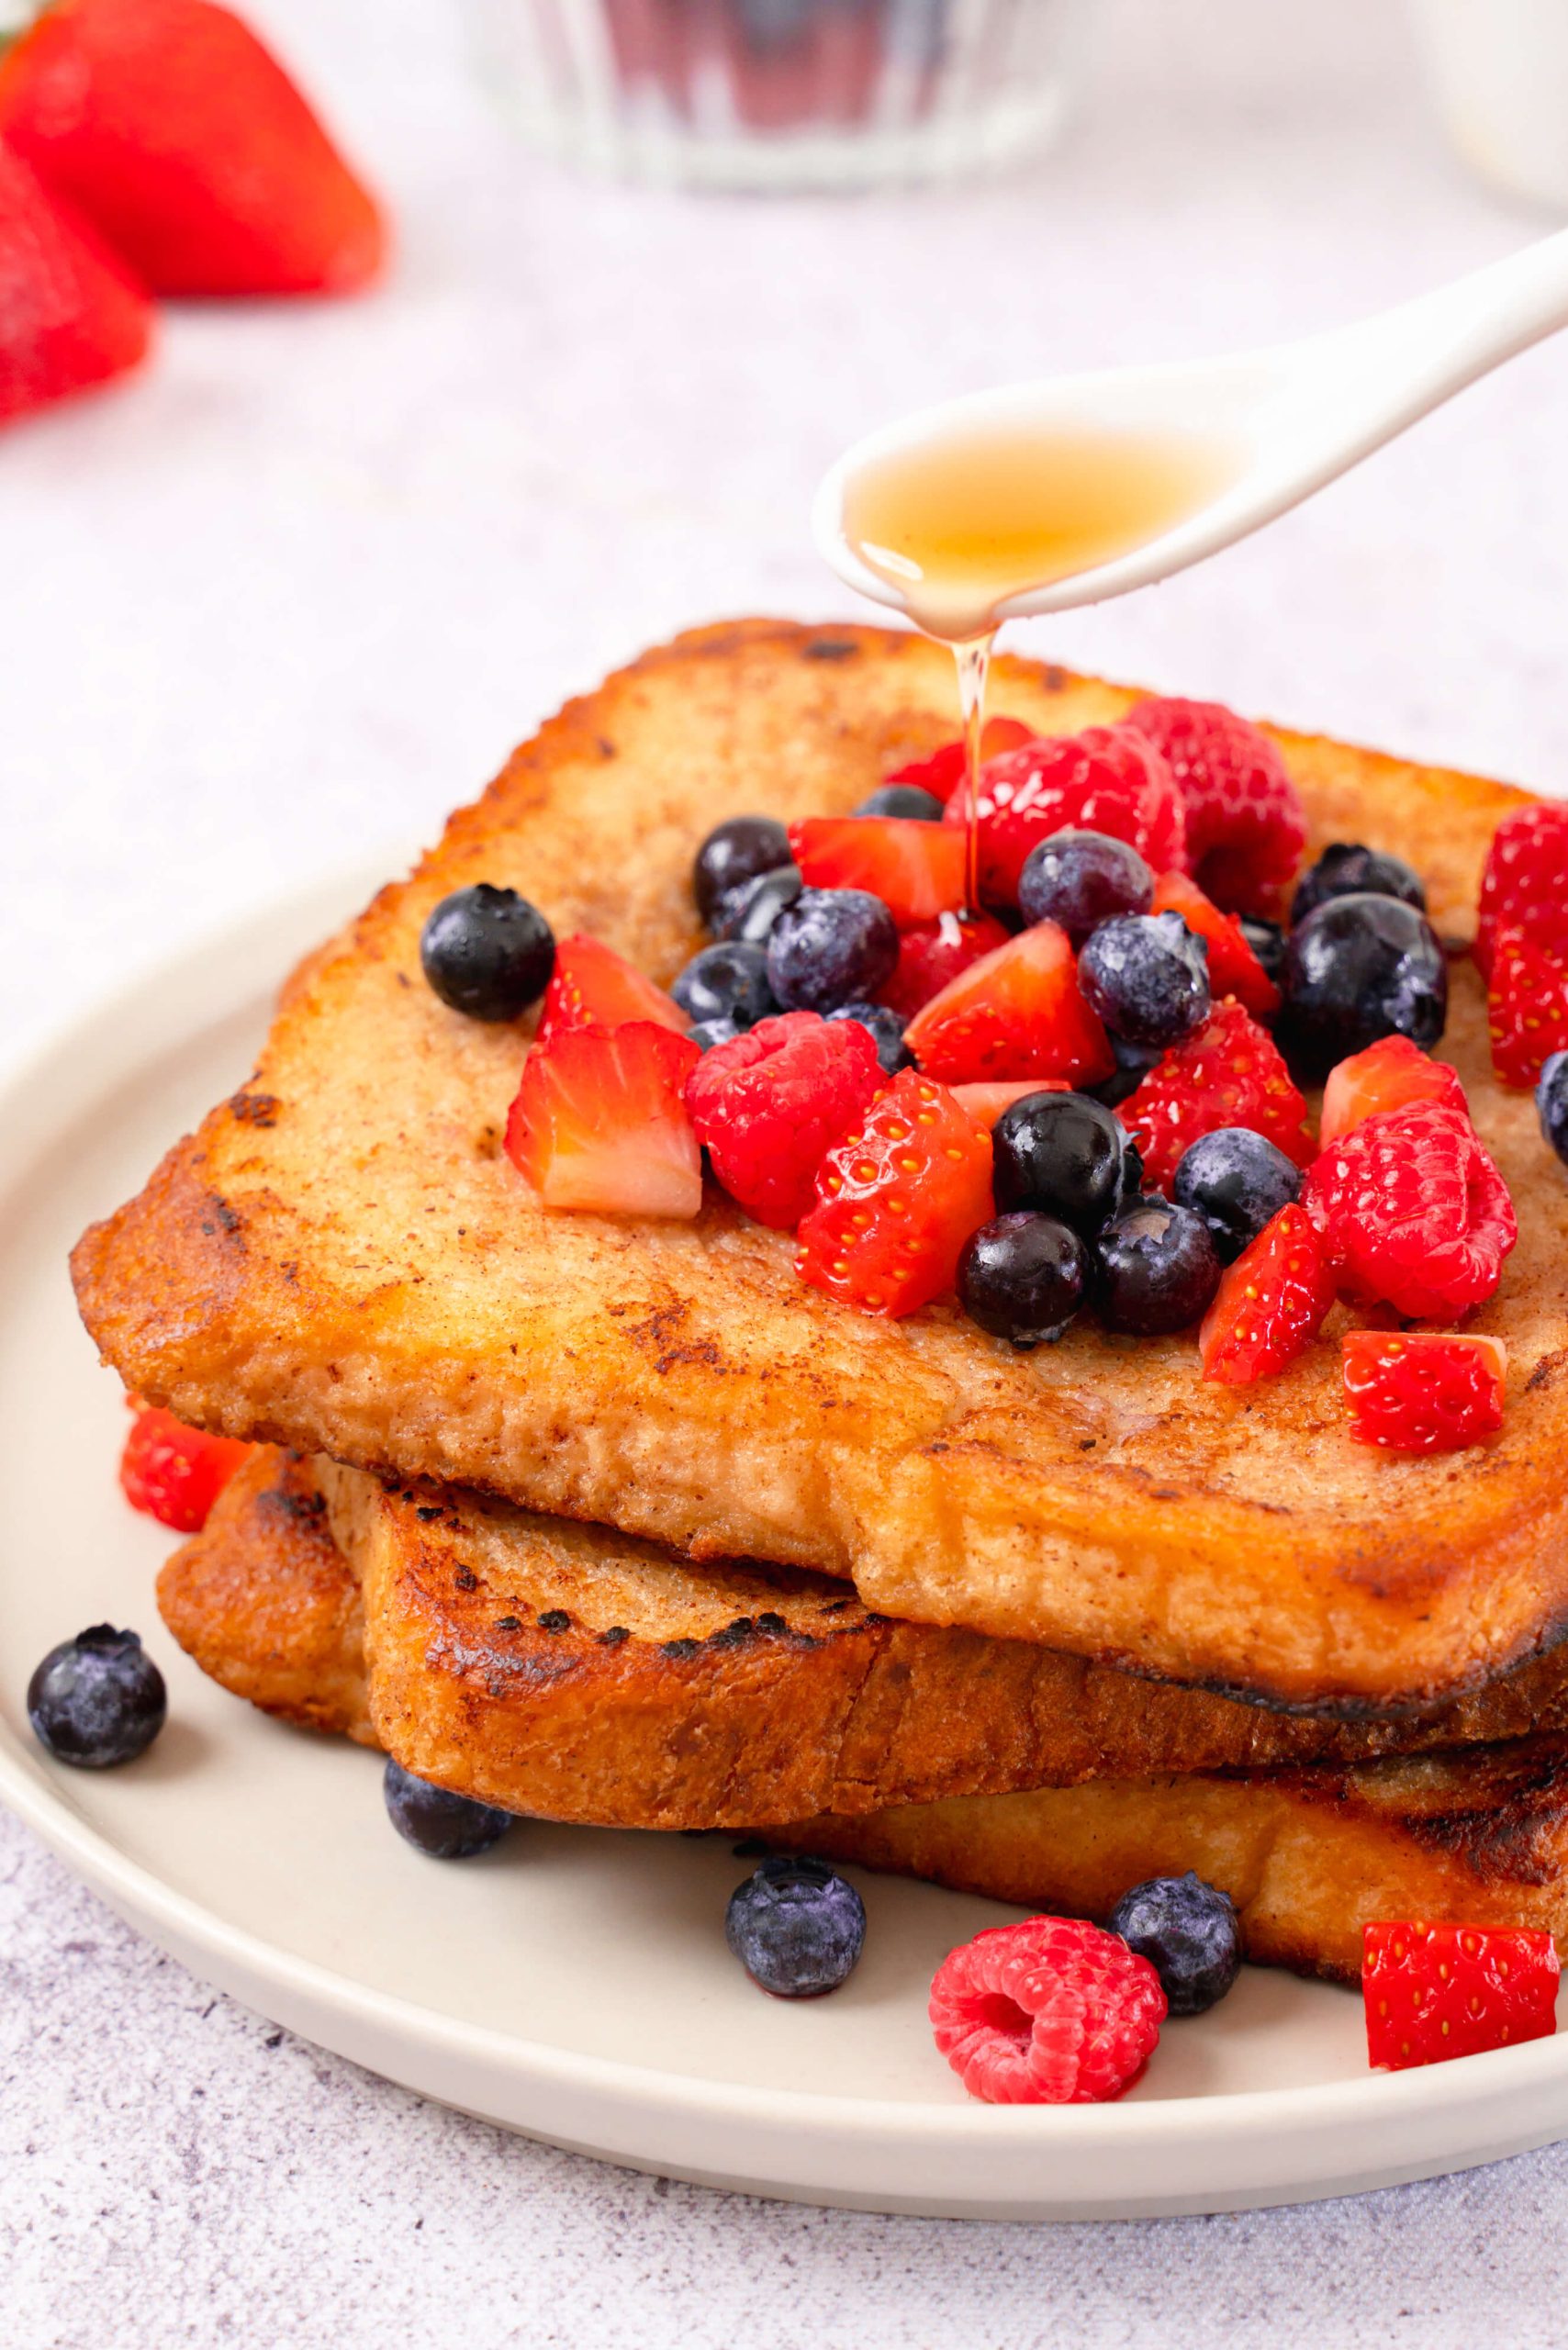 pouring syrup on almond milk french toast topped with berries